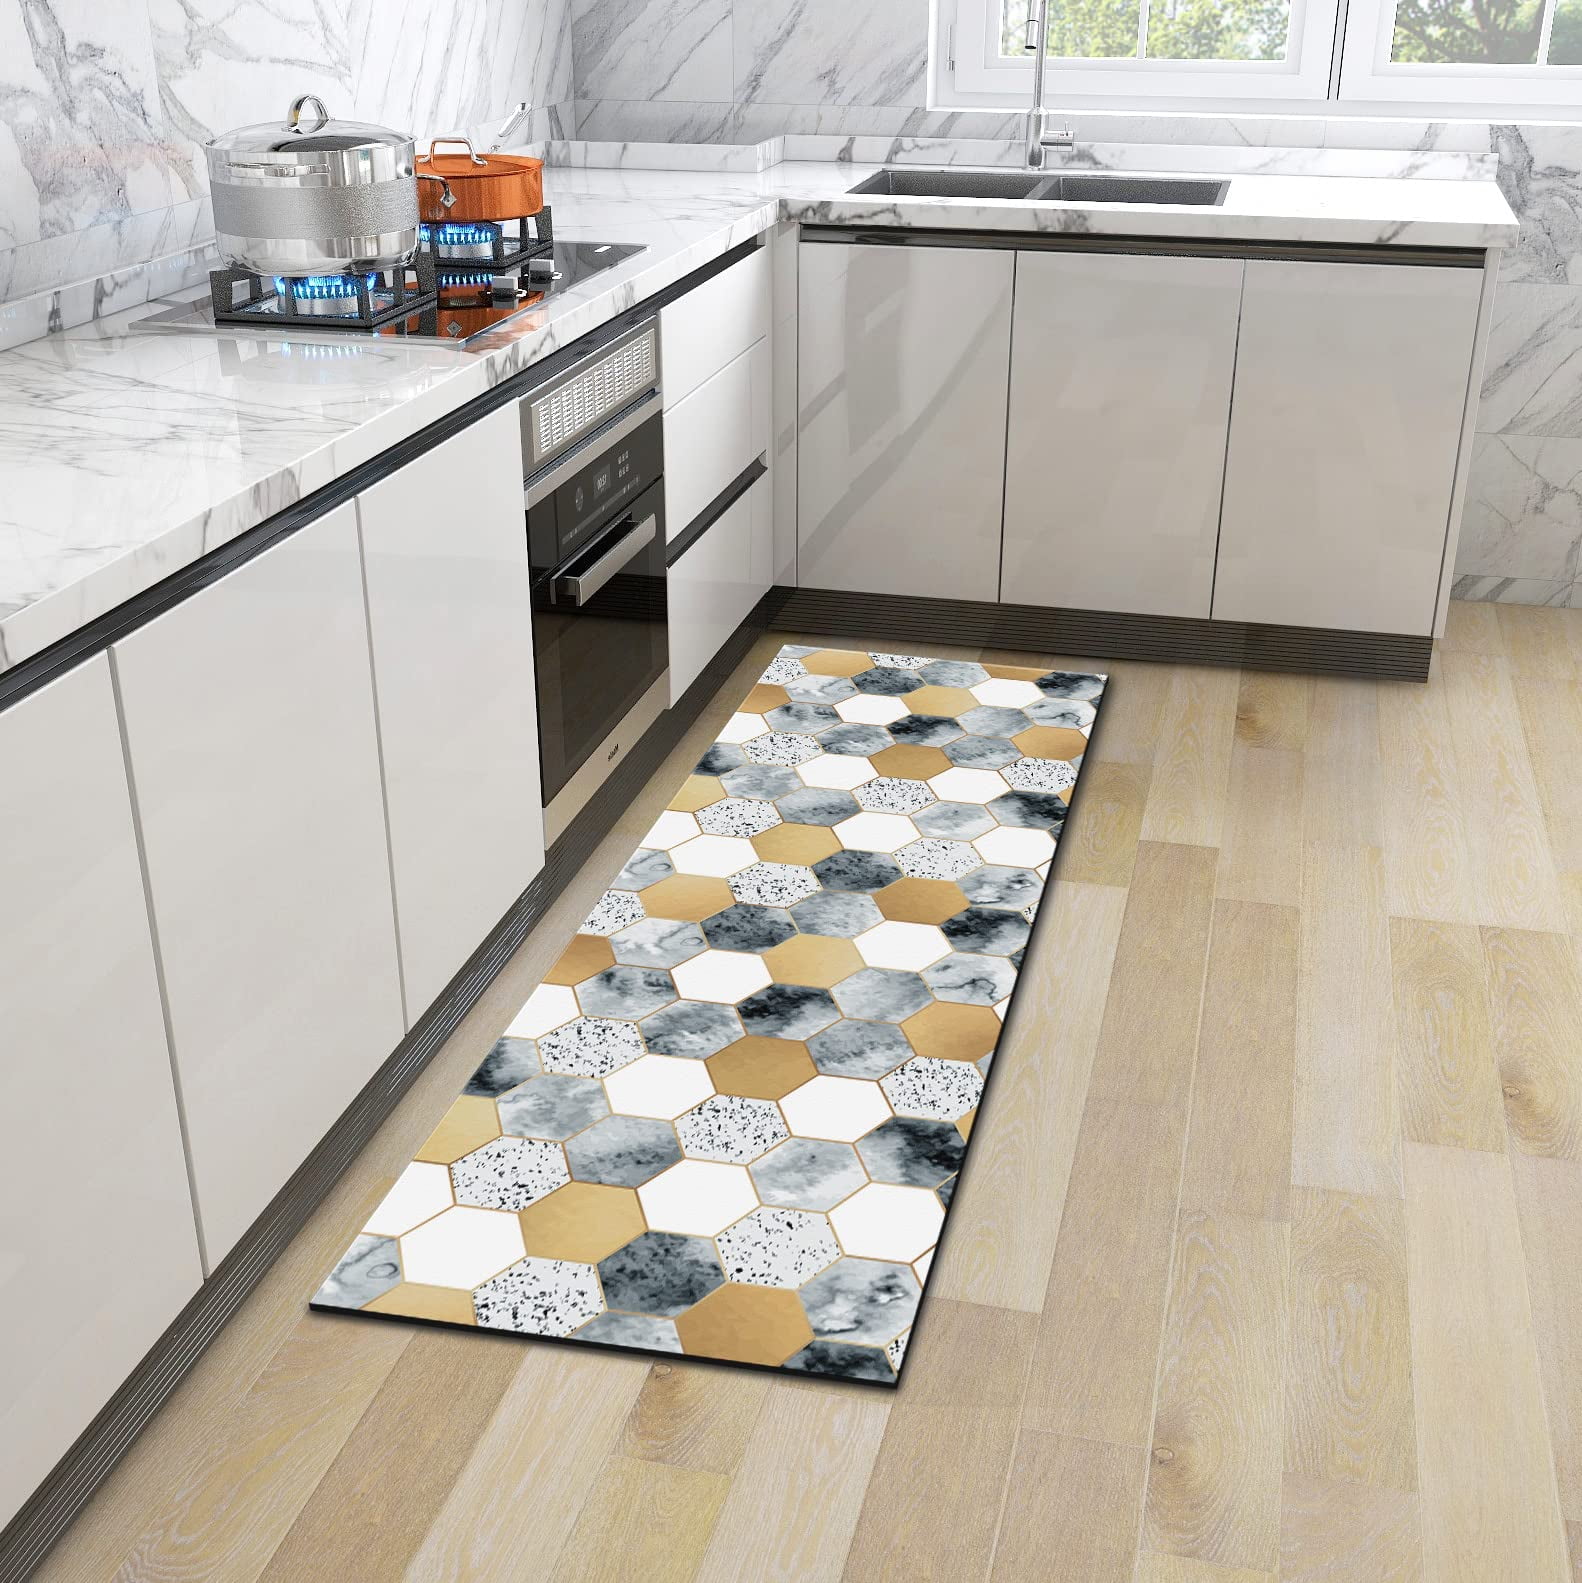  Marble Kitchen Mat Set of 2 Piece, Non-Slip Soft Comfort  Standing Runner Rug for Kitchen Floor Home, Office, Sink, Laundry, Easy to  Clean (17x48+17x24): Home & Kitchen